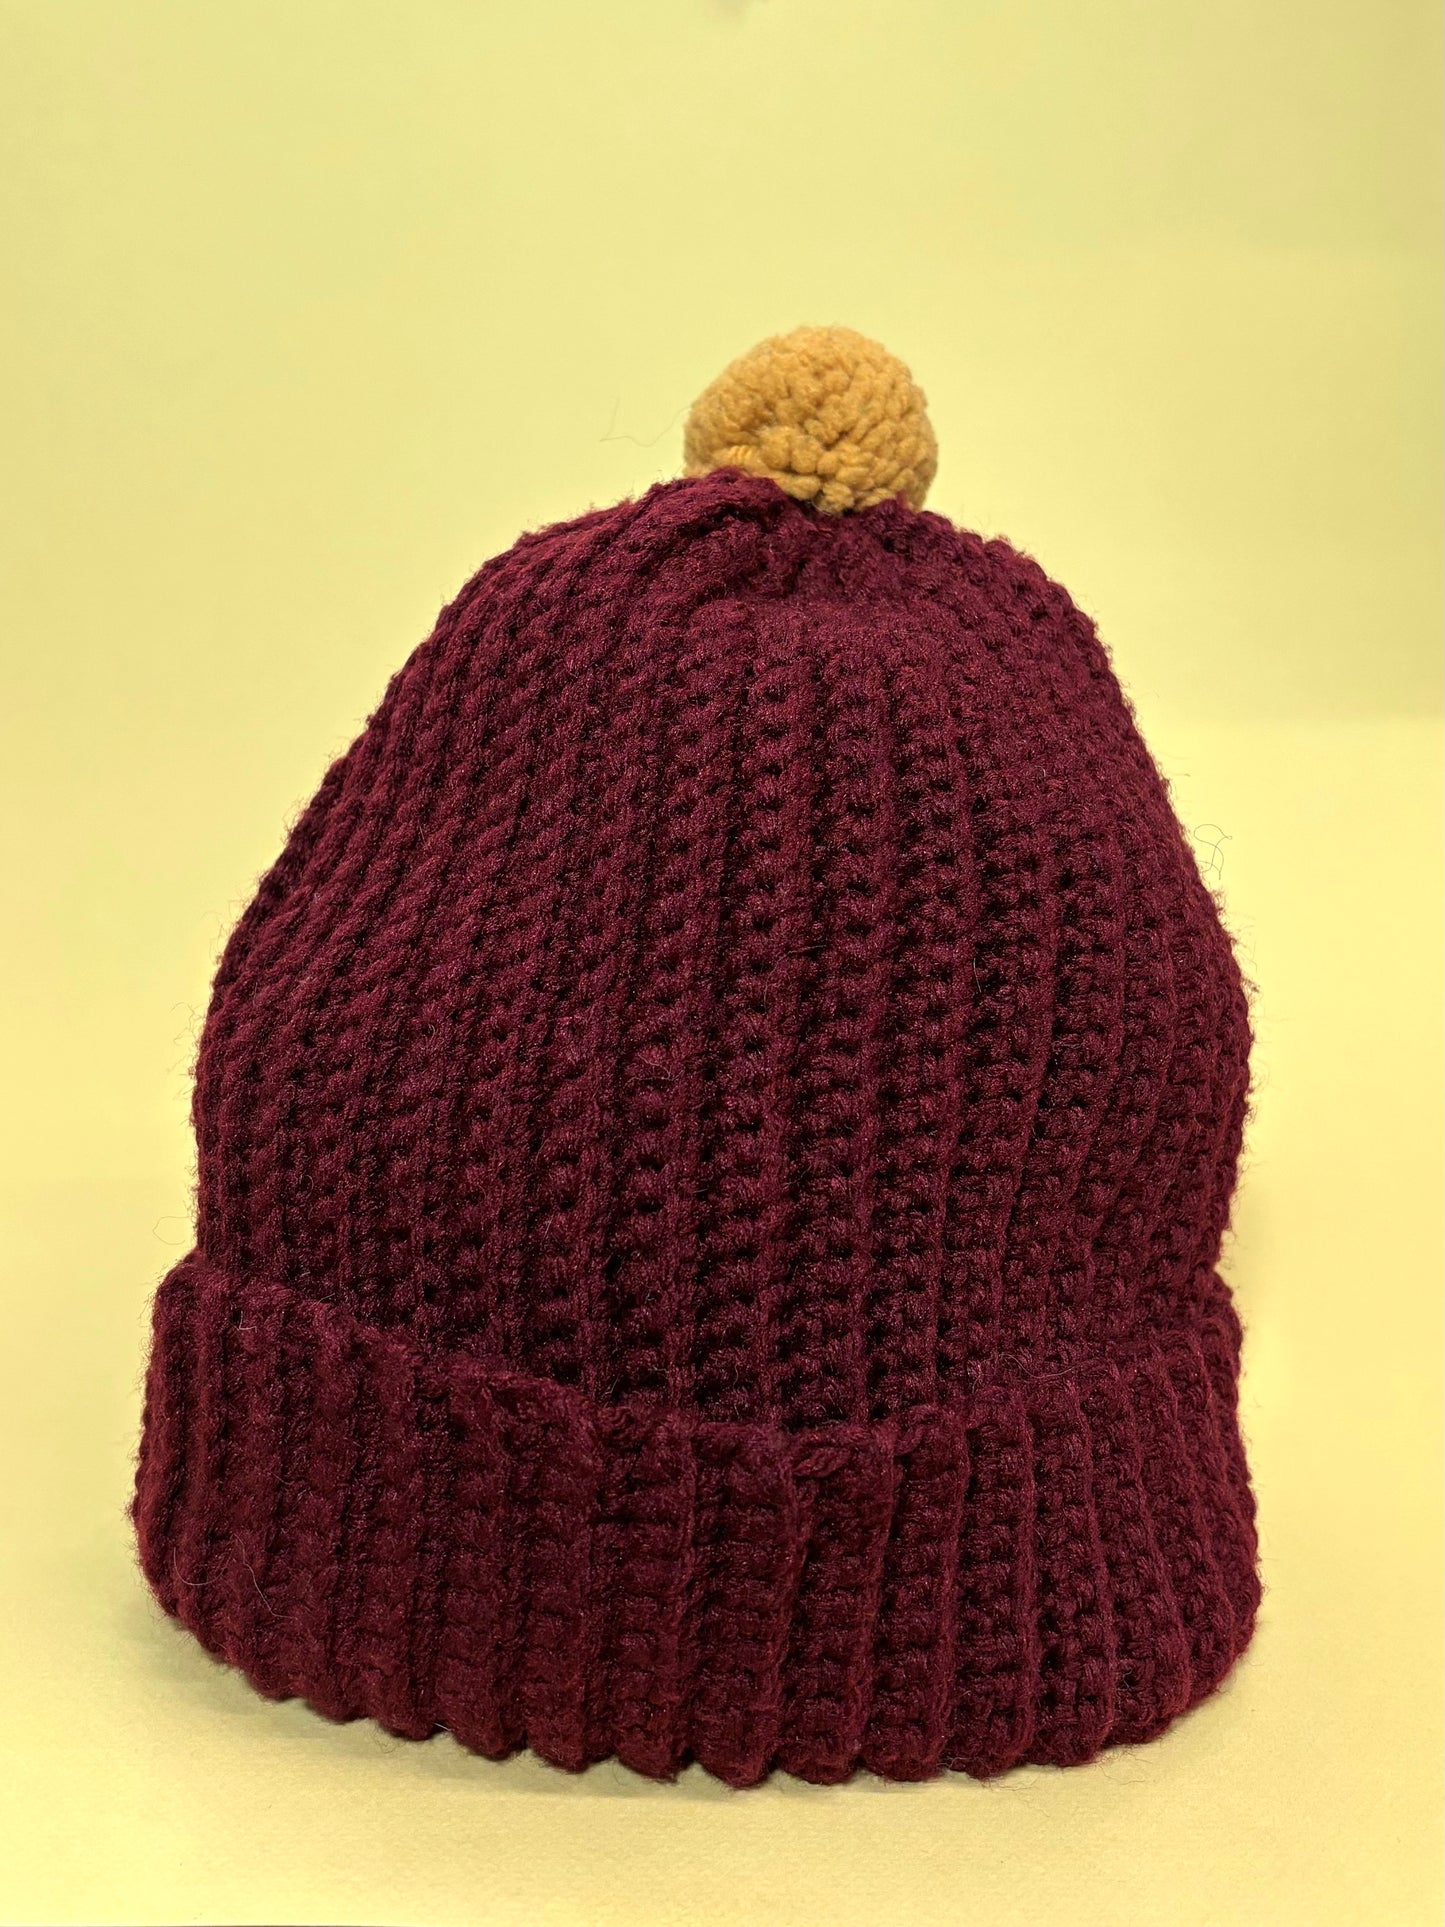 Vintage "Marvelous Mrs. Maisel" Maroon Knit Beanie with Golden Yellow Pom